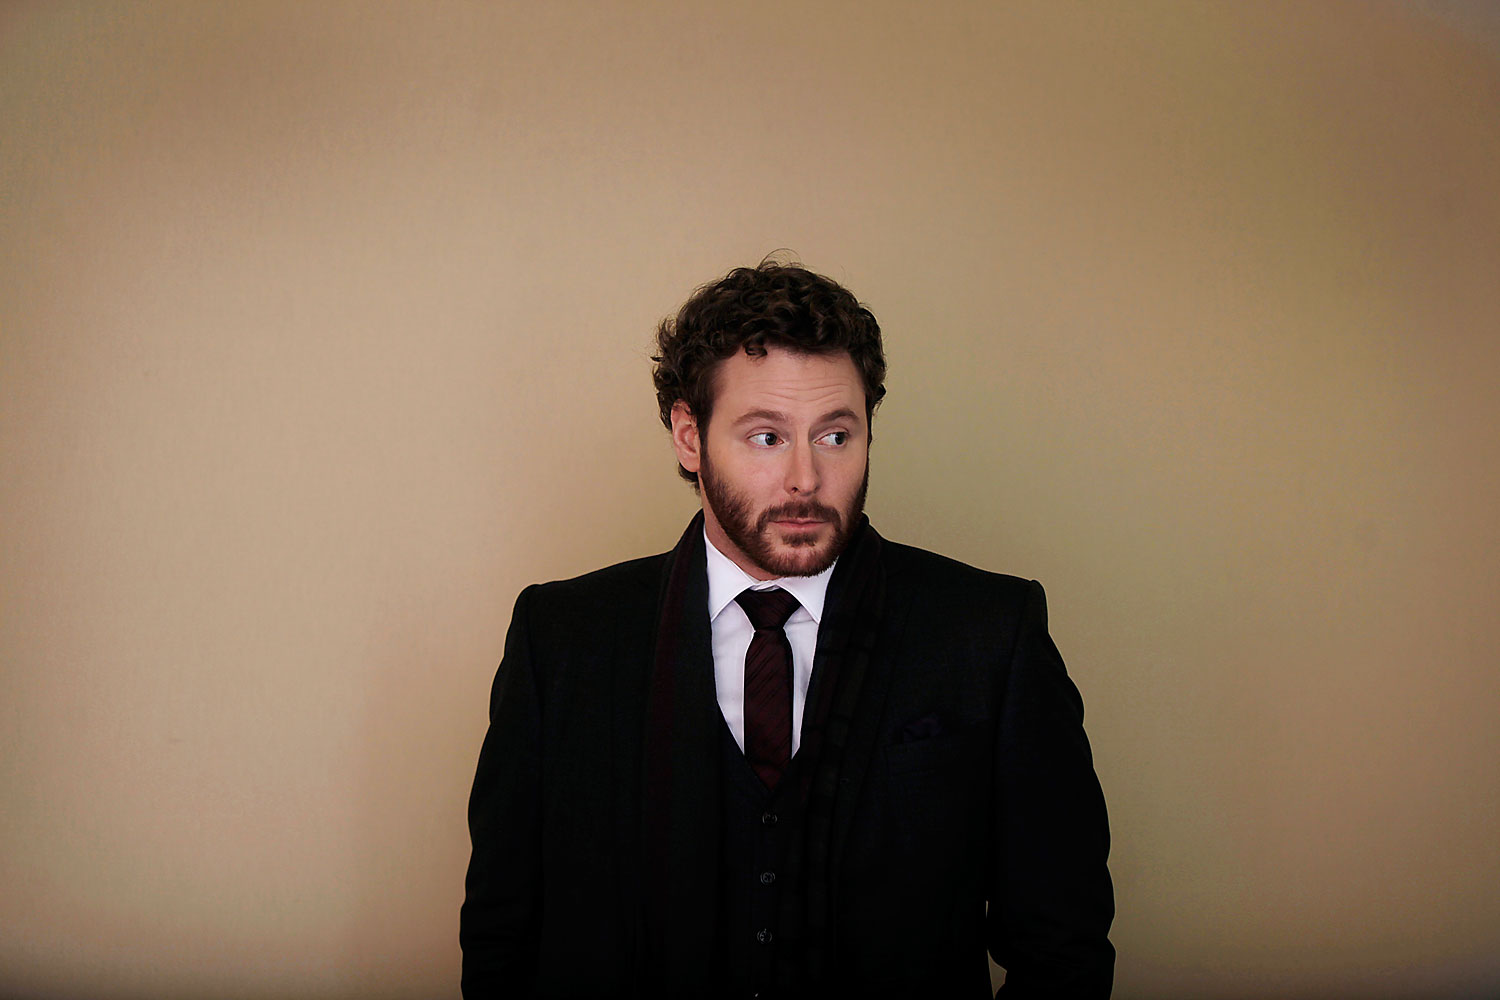 Sean Parker, co-founder of Napster Inc. and managing partner of the Founders Fund, stands for a photograph following a television interview on day three of the World Economic Forum in Davos, Switzerland in 2012